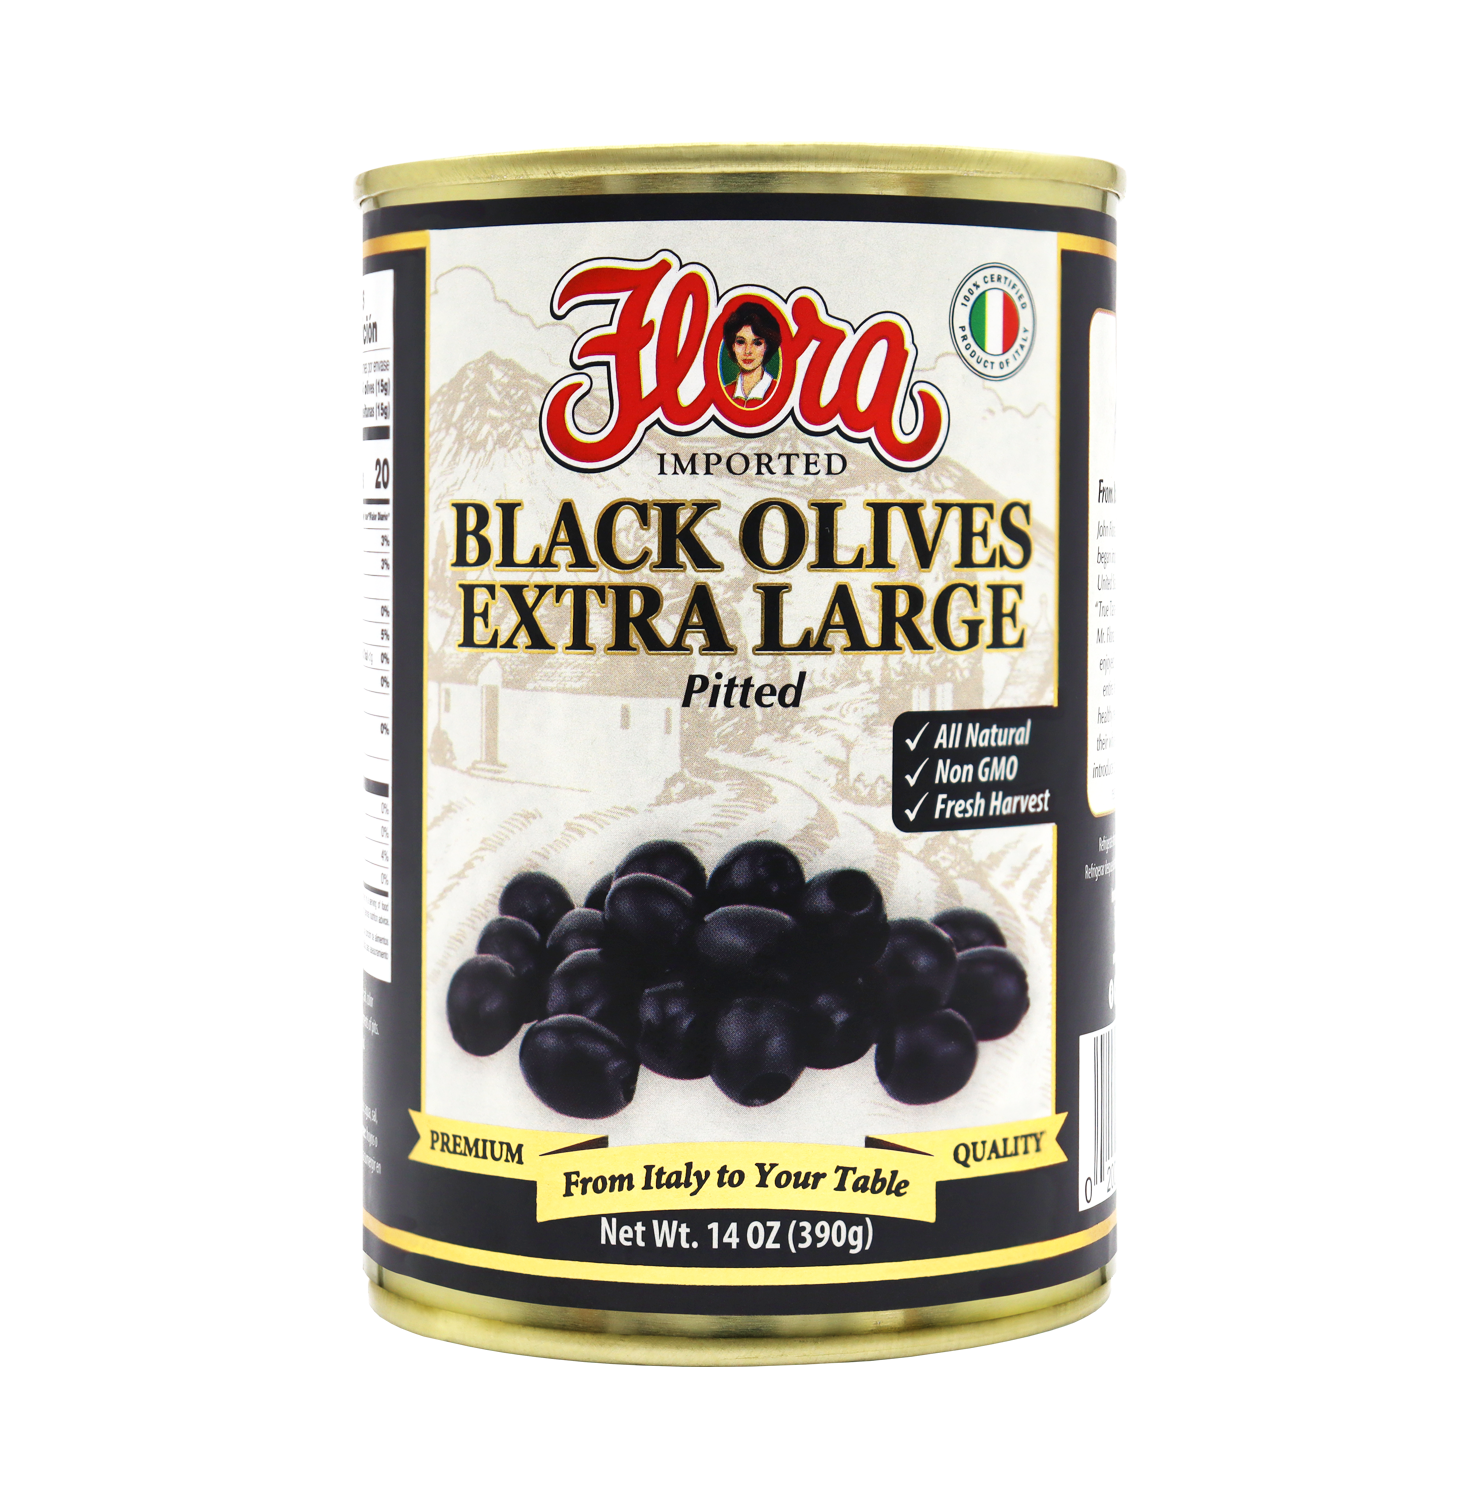 Save on Giant Ripe Black Olives Large Pitted Order Online Delivery